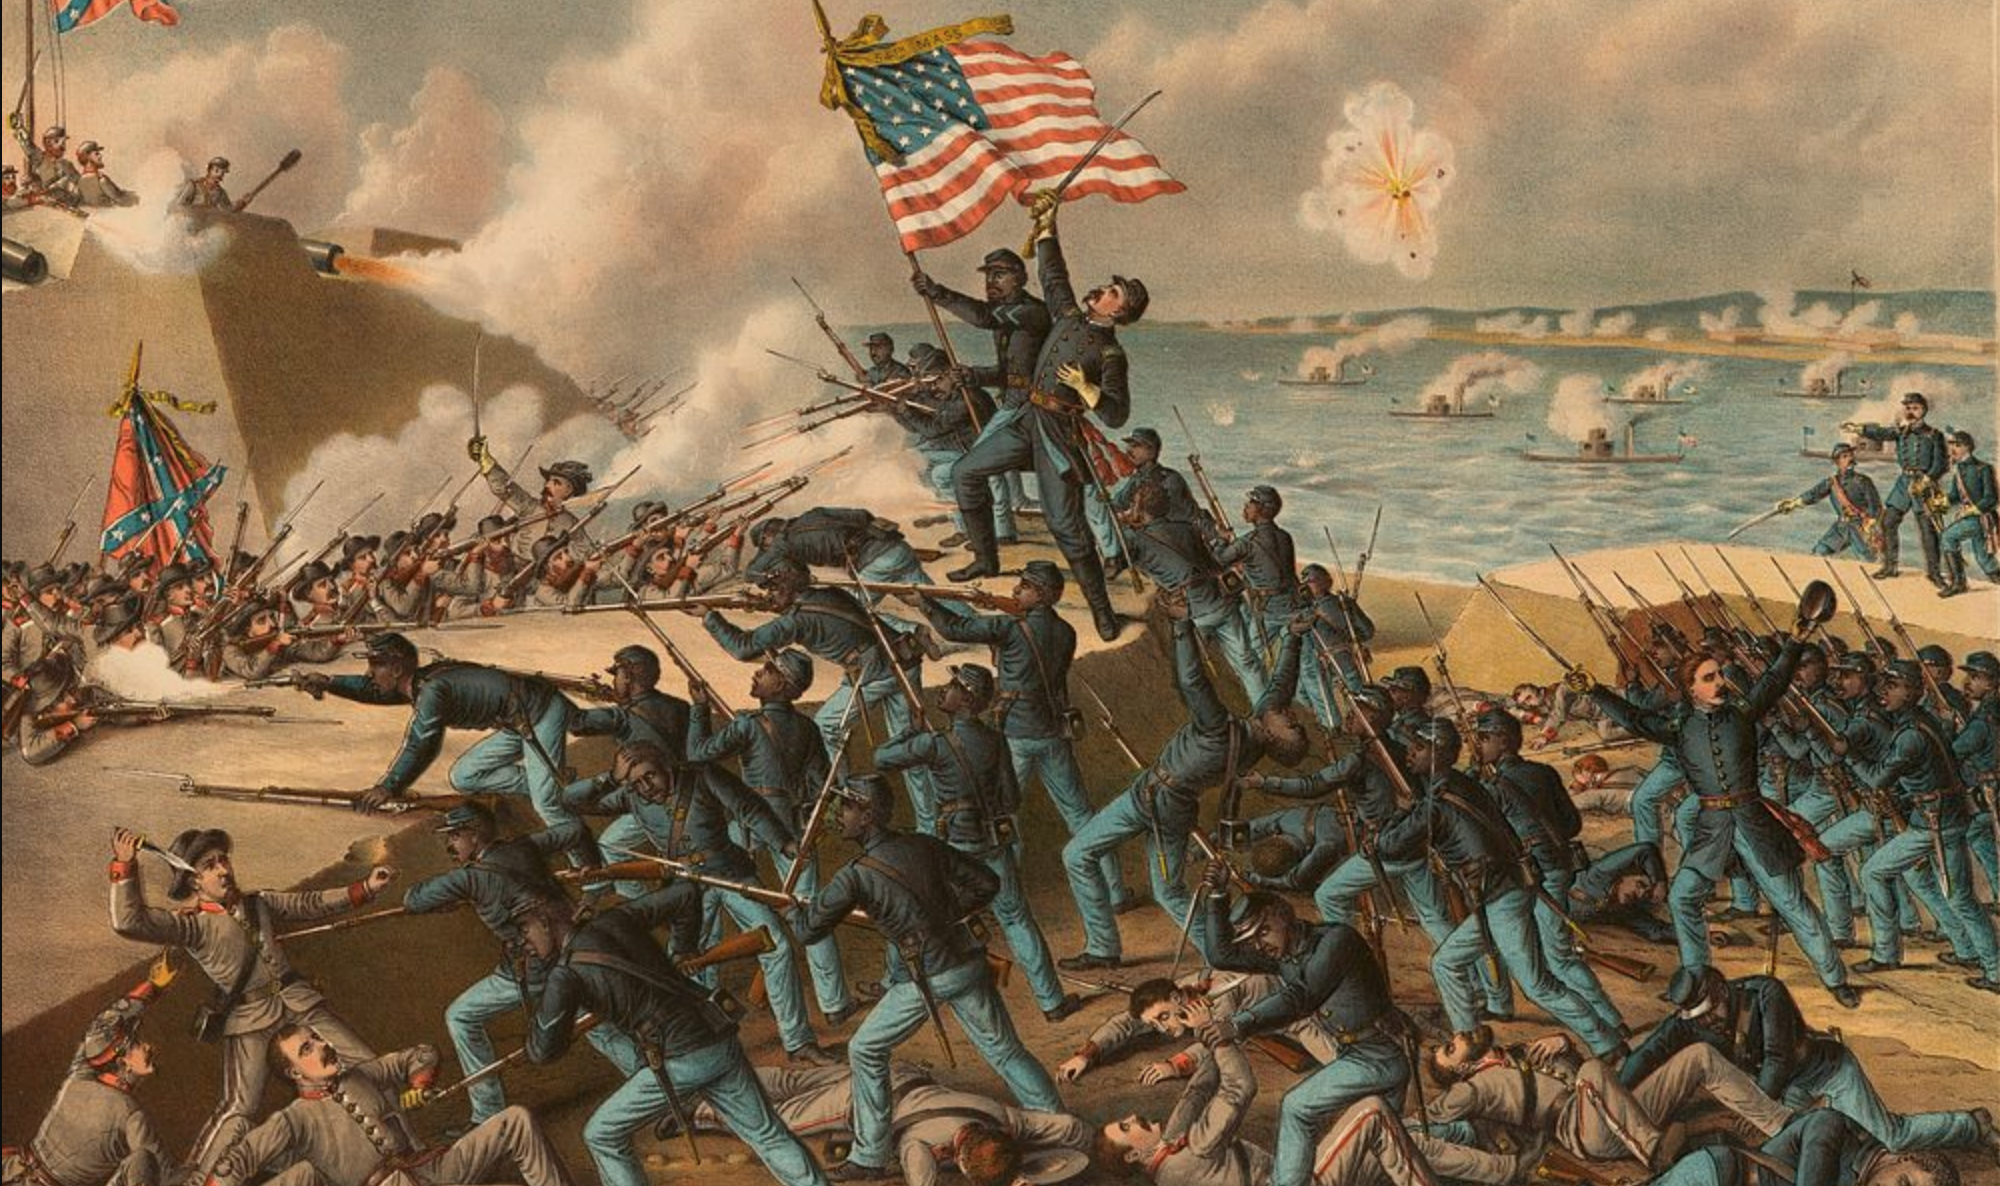 Are Americans Headed Toward a Civil War? - The American Conservative